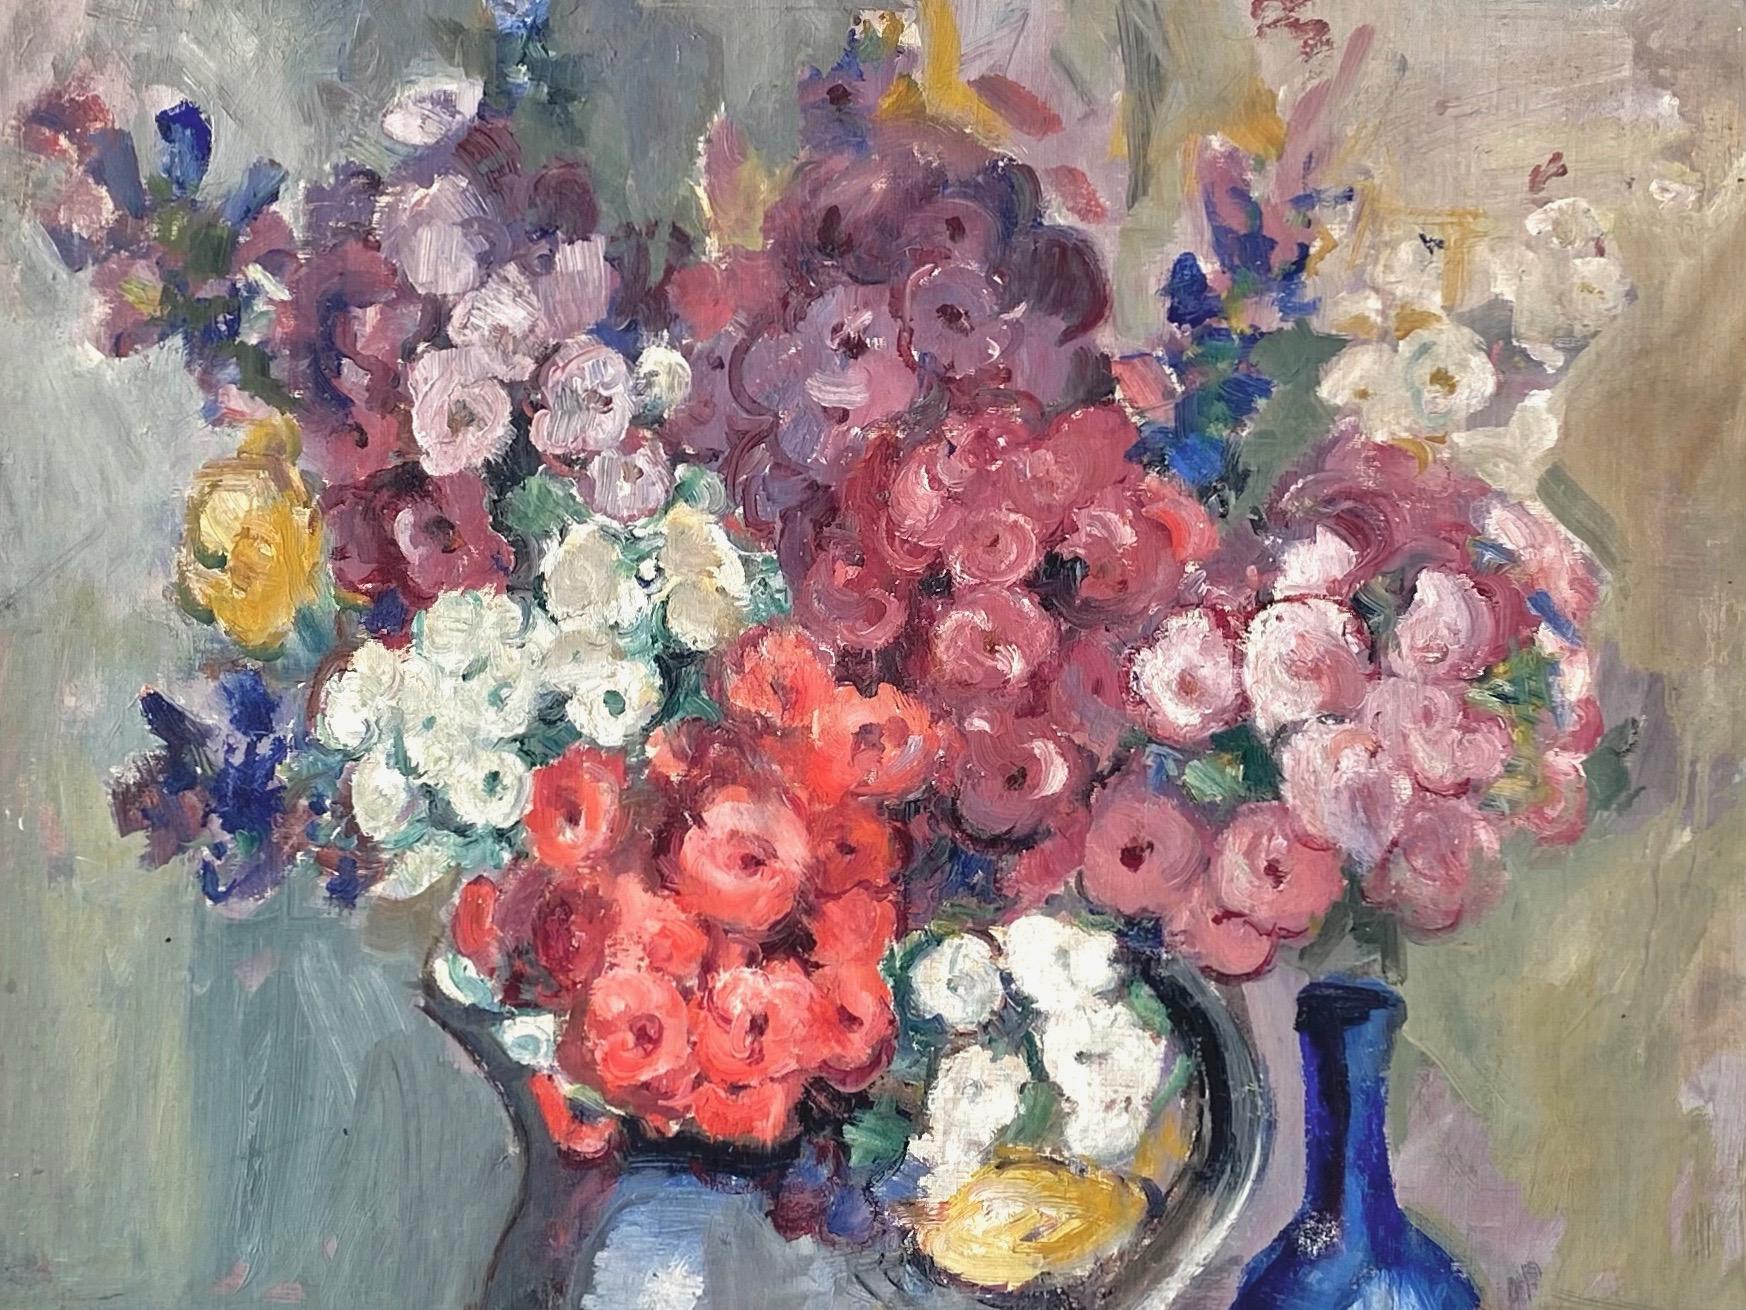 American Alberta Kinsey “Still Life with Flowers” Impressionist Oil Painting, 1920s